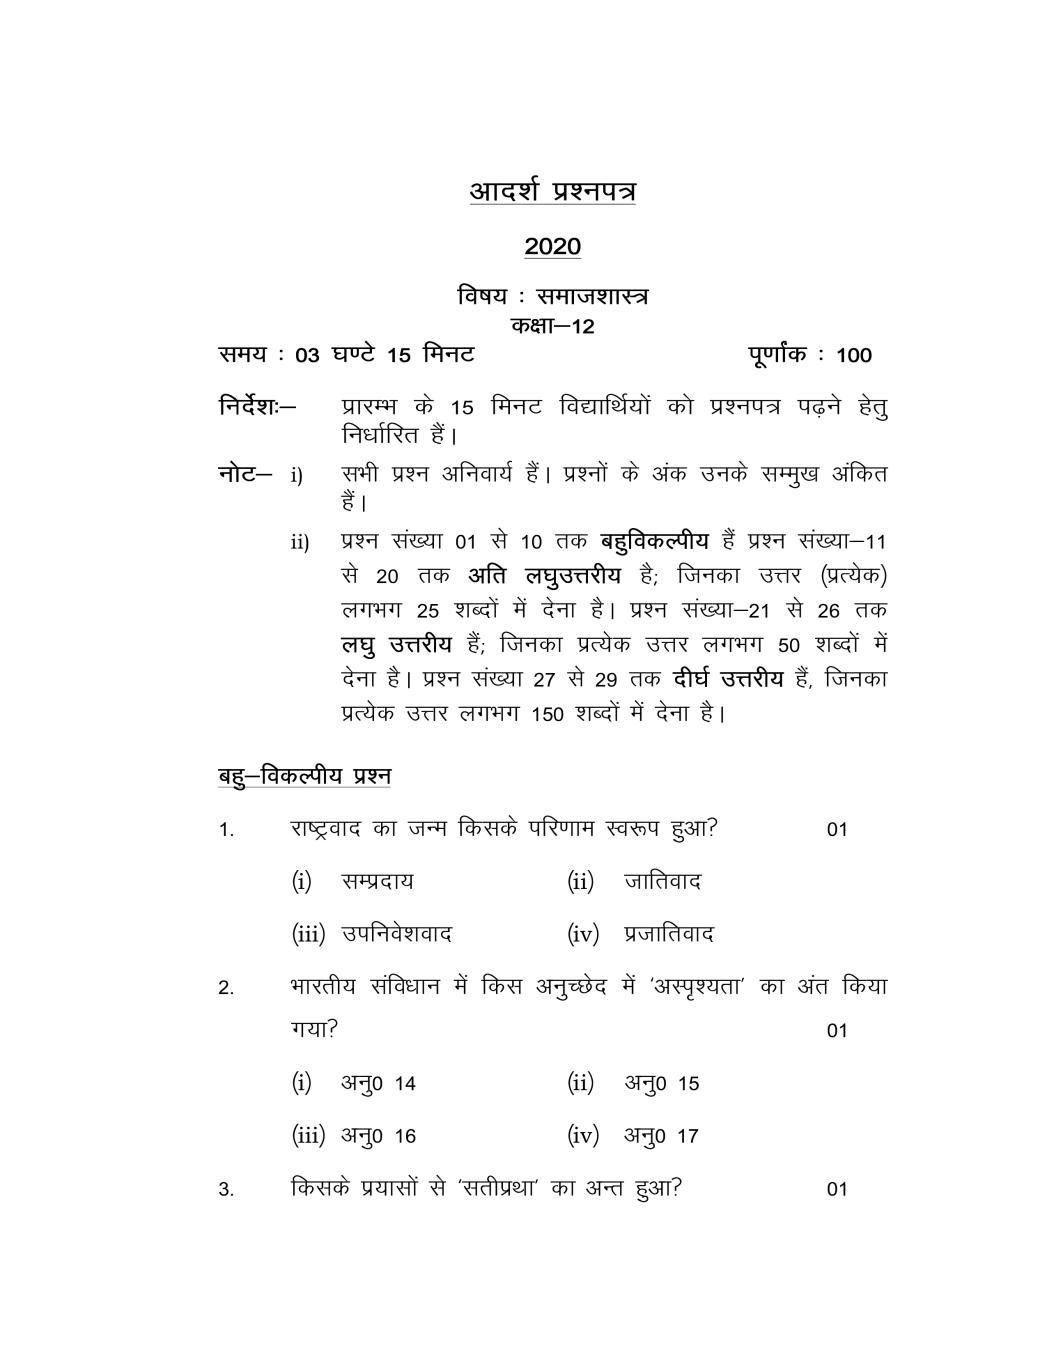 UP Board Class 12 Model Paper 2020 SOCIOLOGY - Page 1